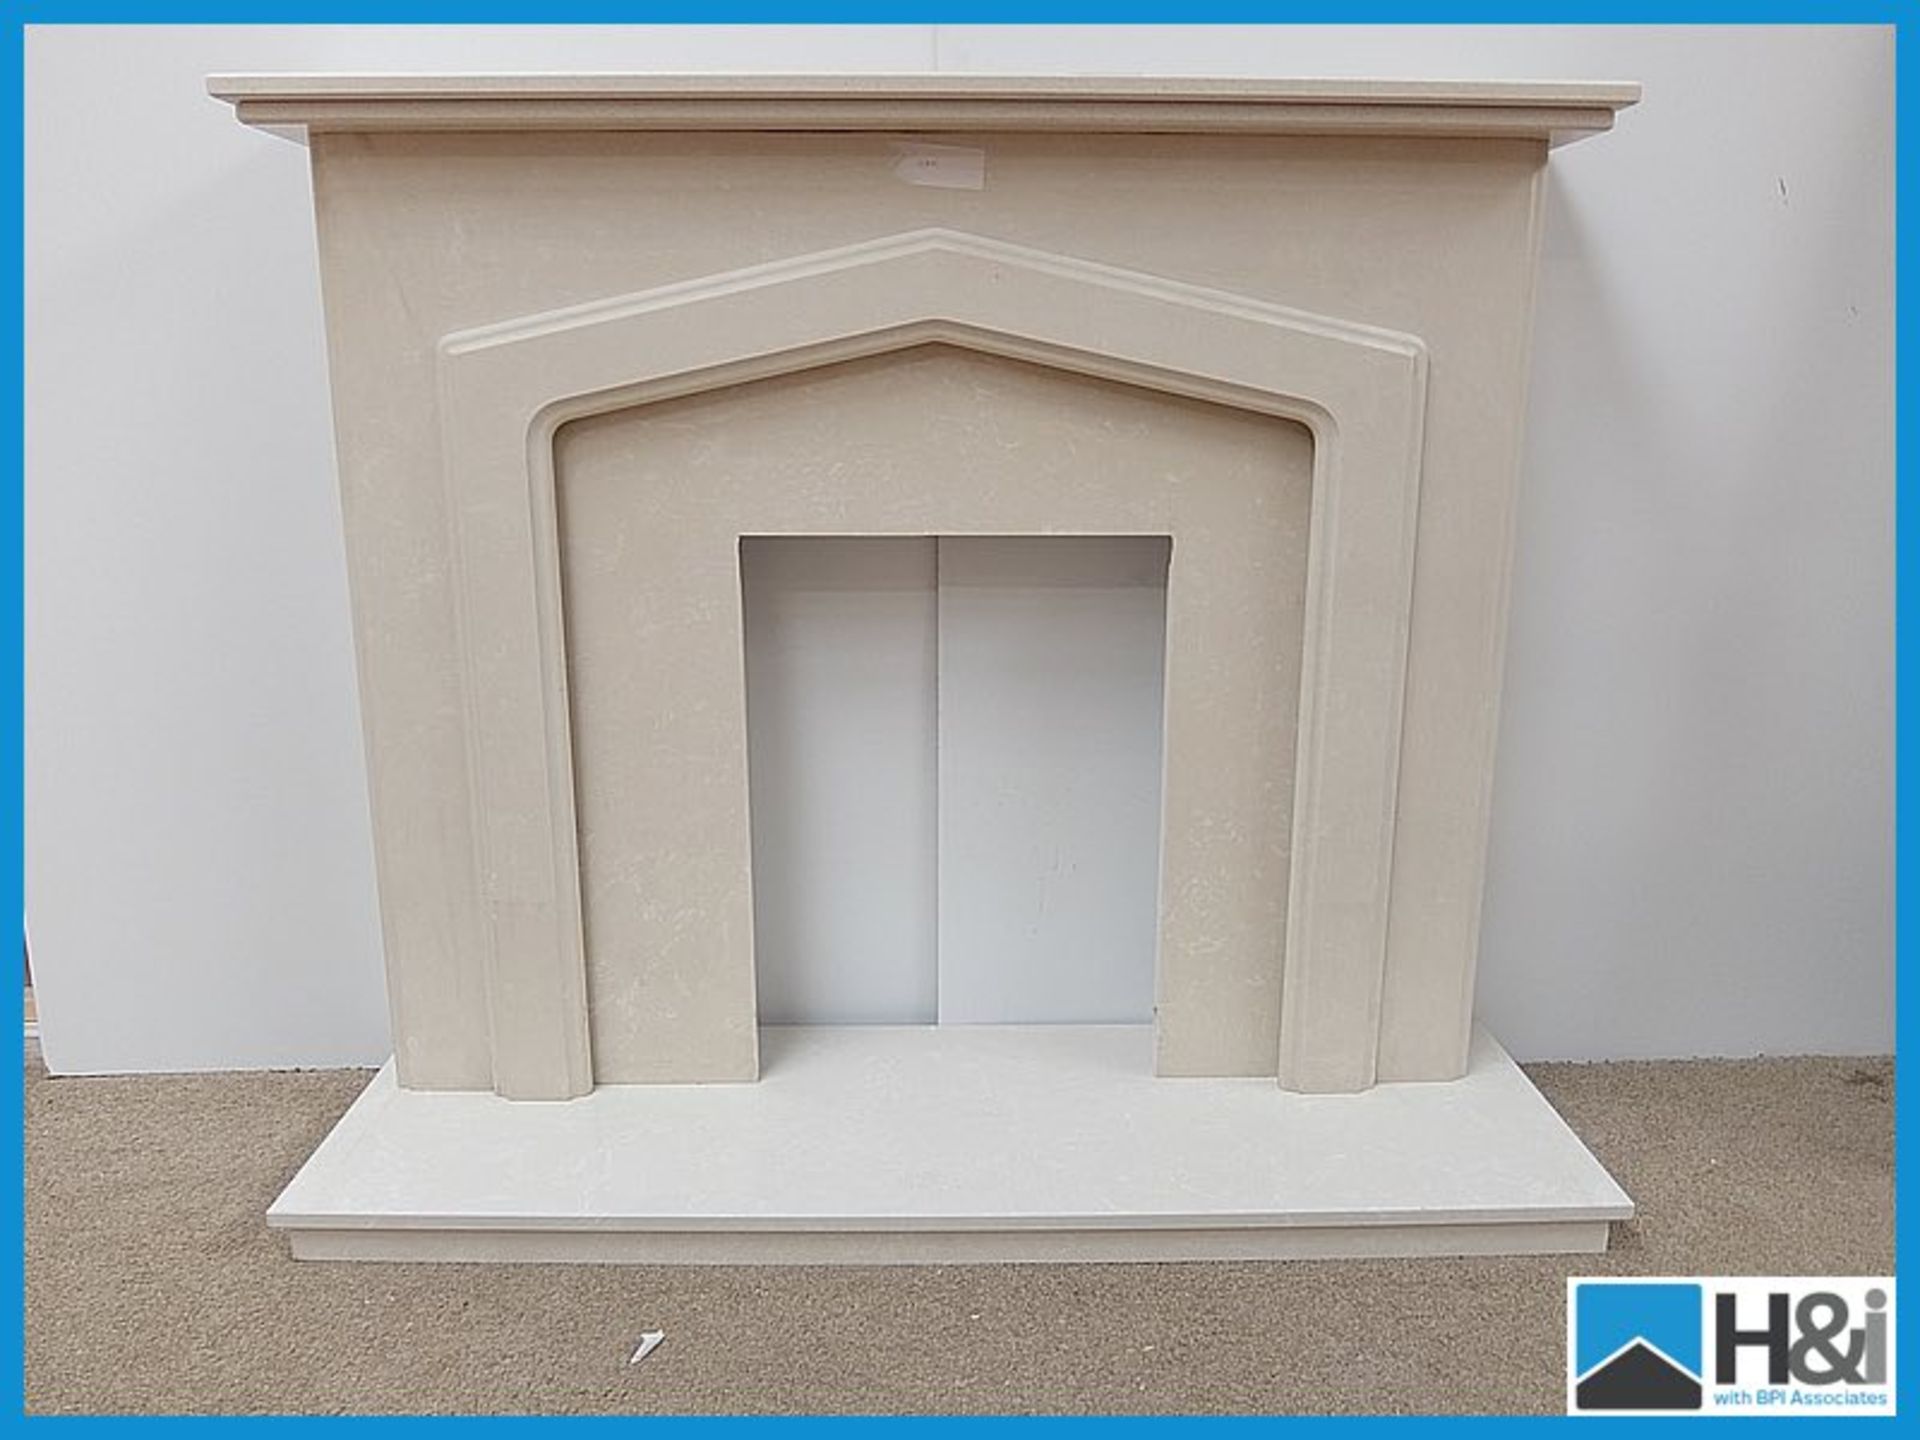 MAR379 Fire Surround Set 40" high x 48" wide. Comprising surround, hearth, back and mantle. Made